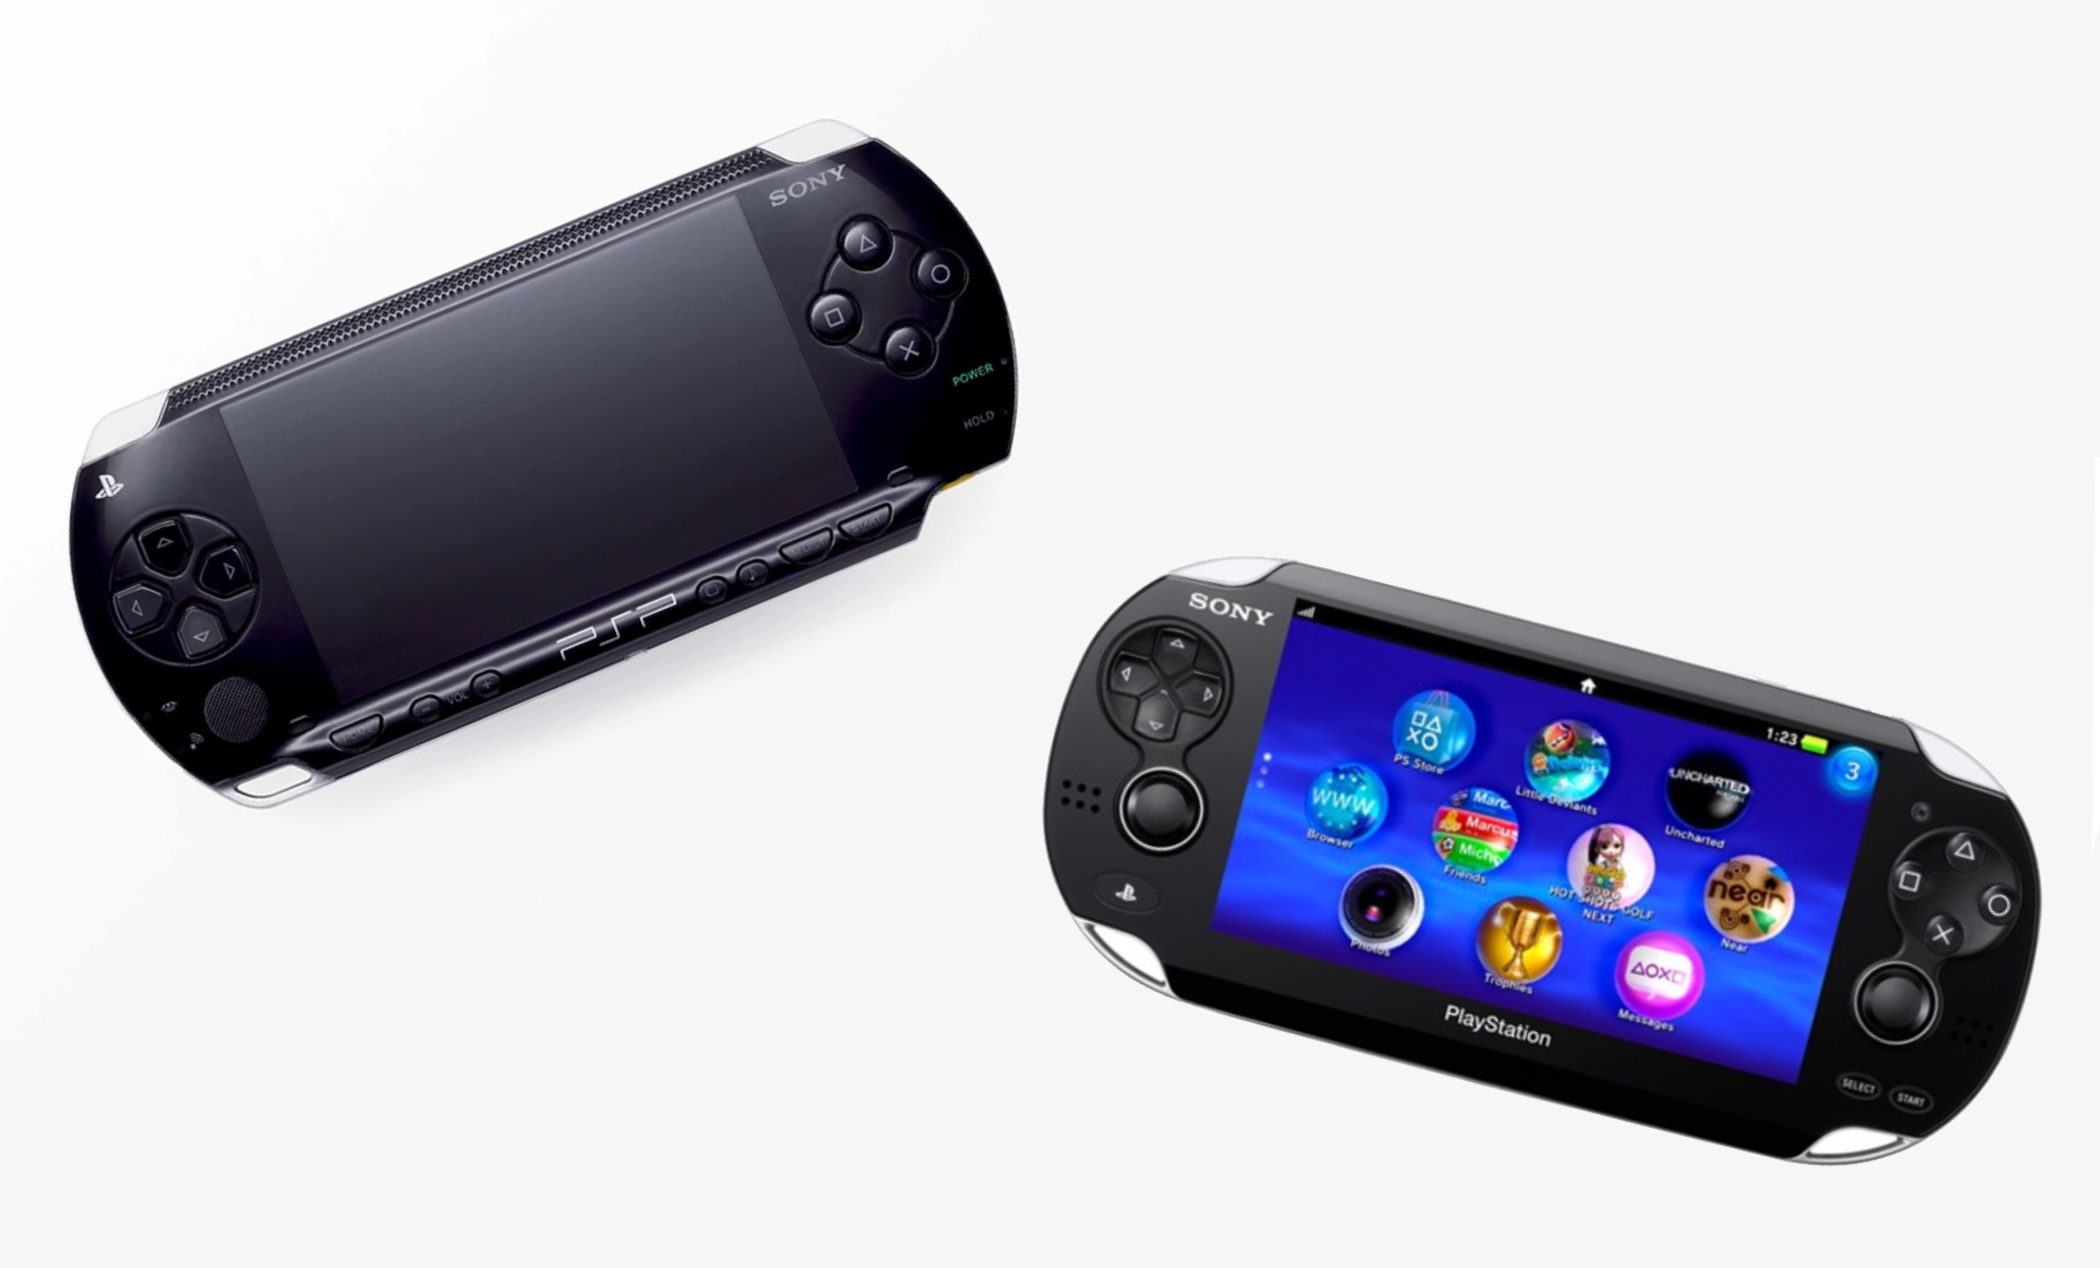 Sony's Next Big Play: The Buzz Around Rumored PSP 2 Sparks Portable Gaming Excitement